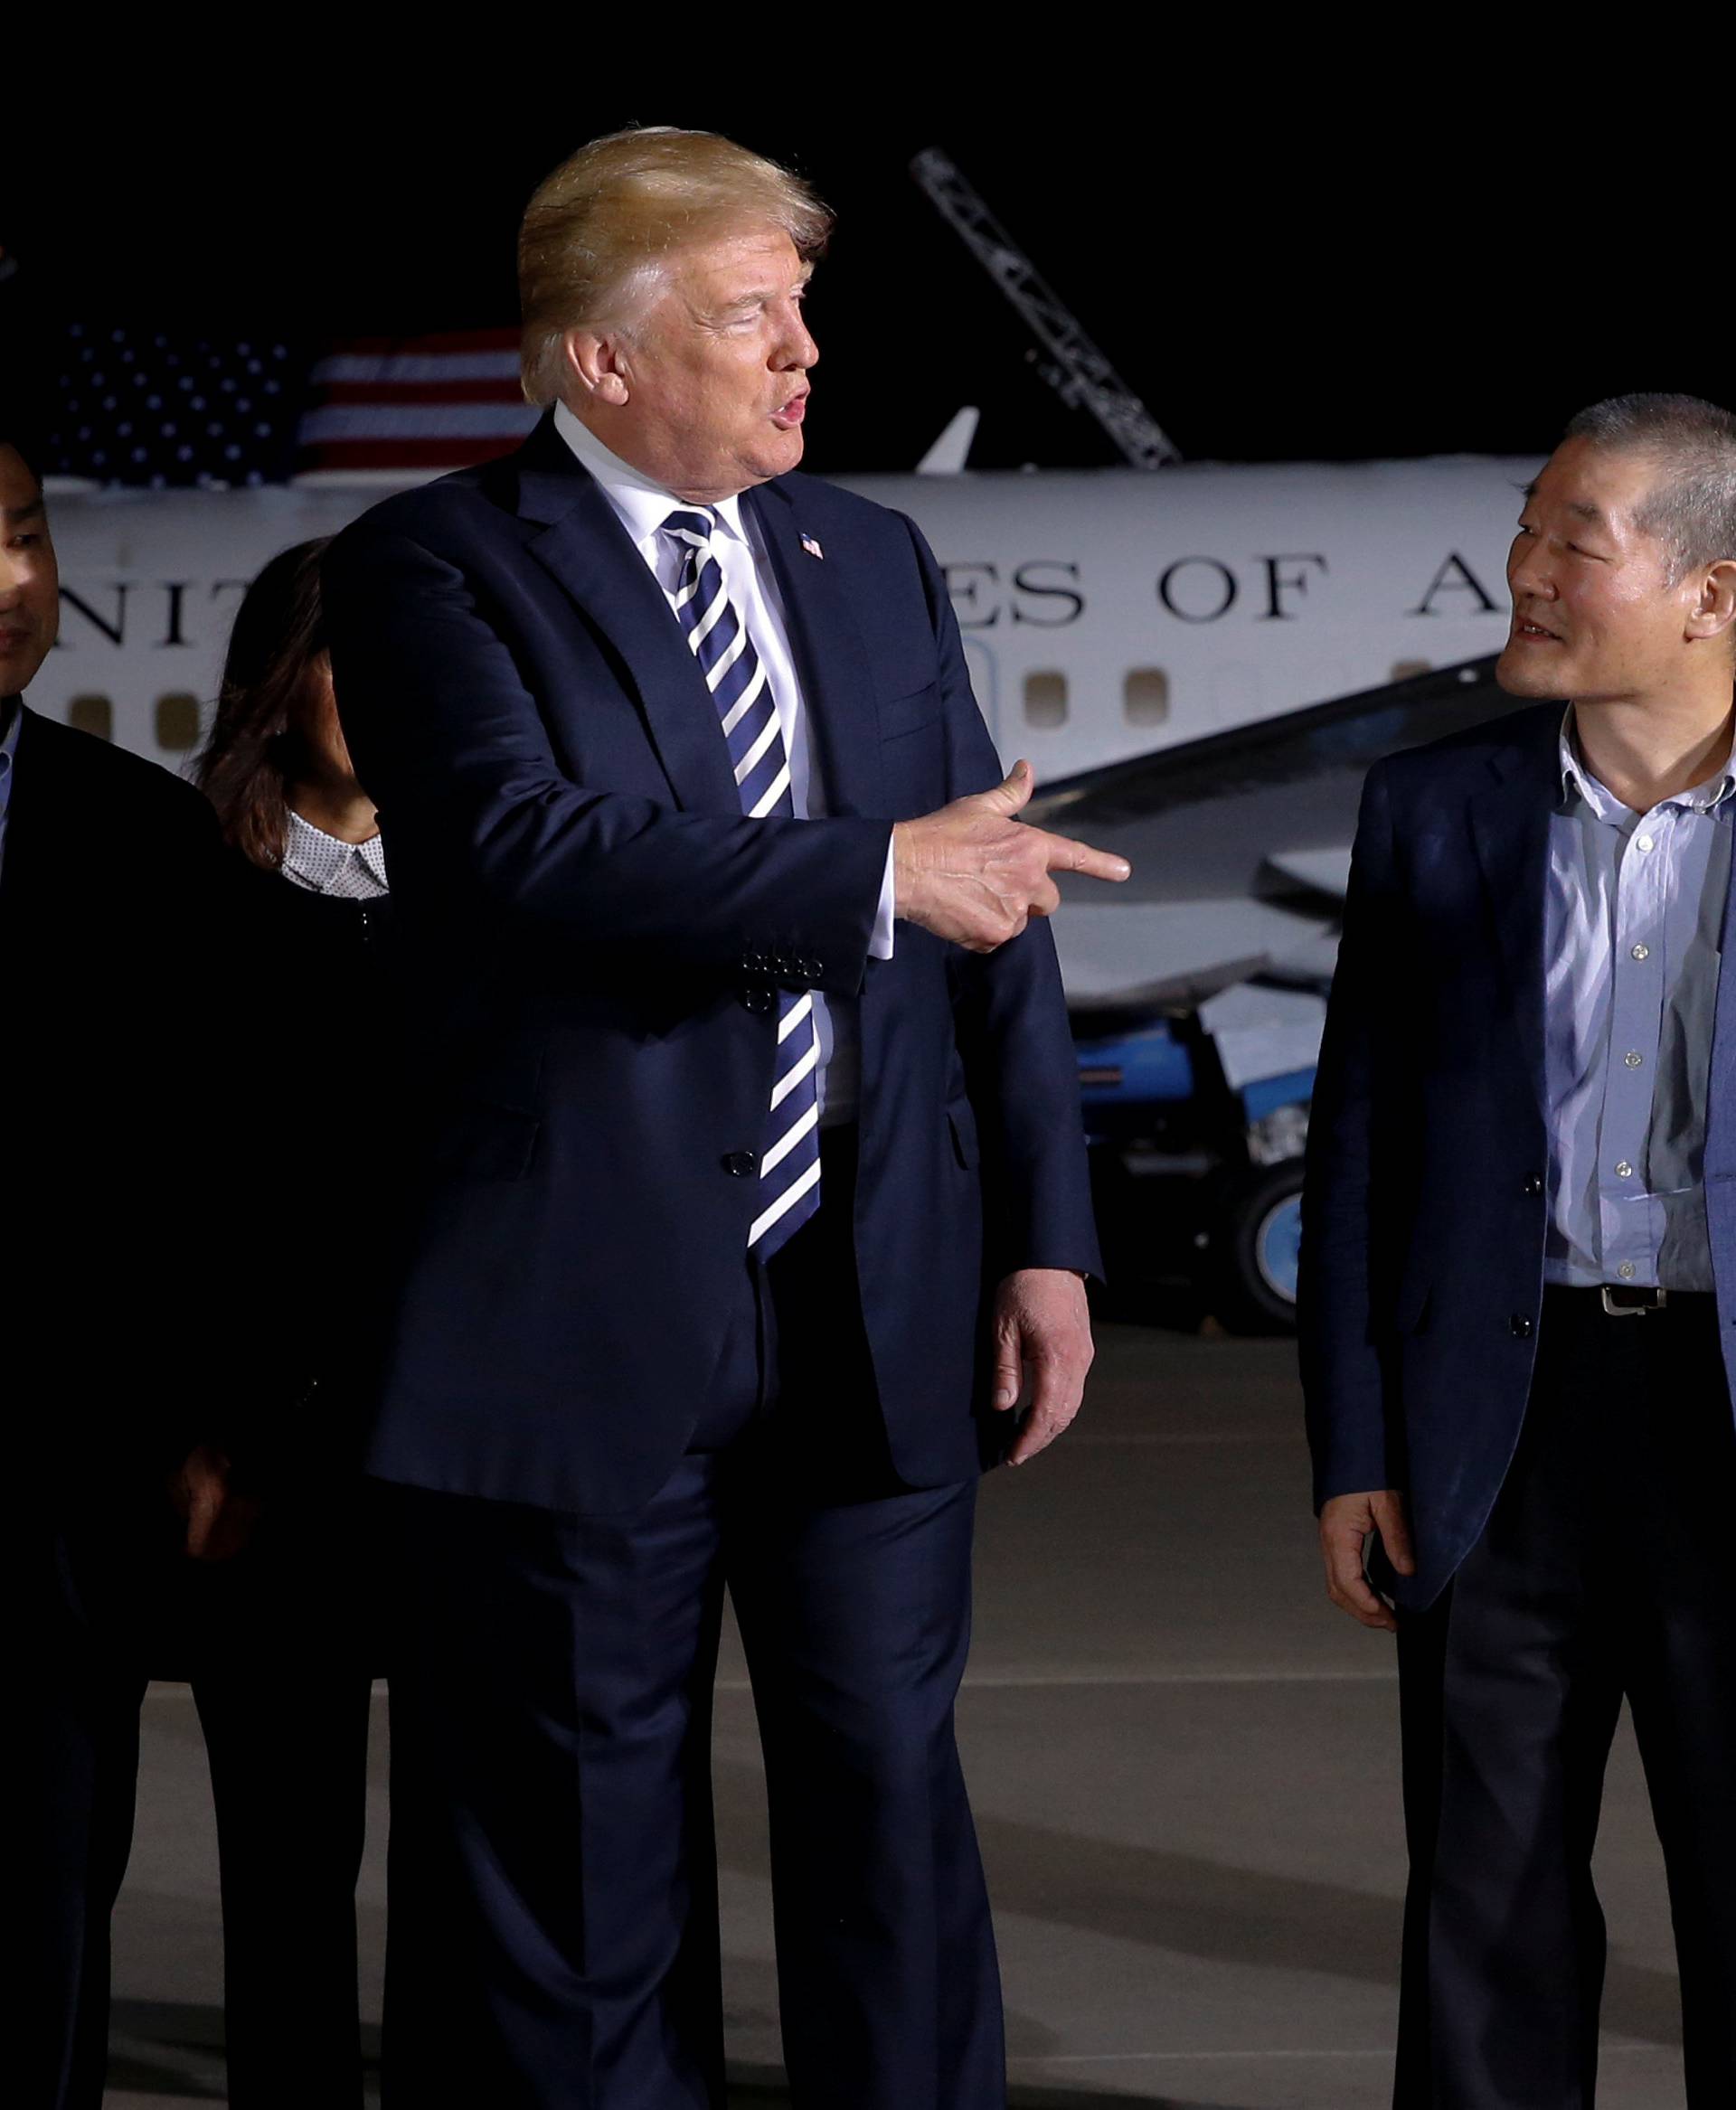 U.S.President Donald Trump greets the Americans released from detention in North Korea, Tony Kim, Kim Hak-song and Kim Dong-chul, upon their arrival at Joint Base Andrews